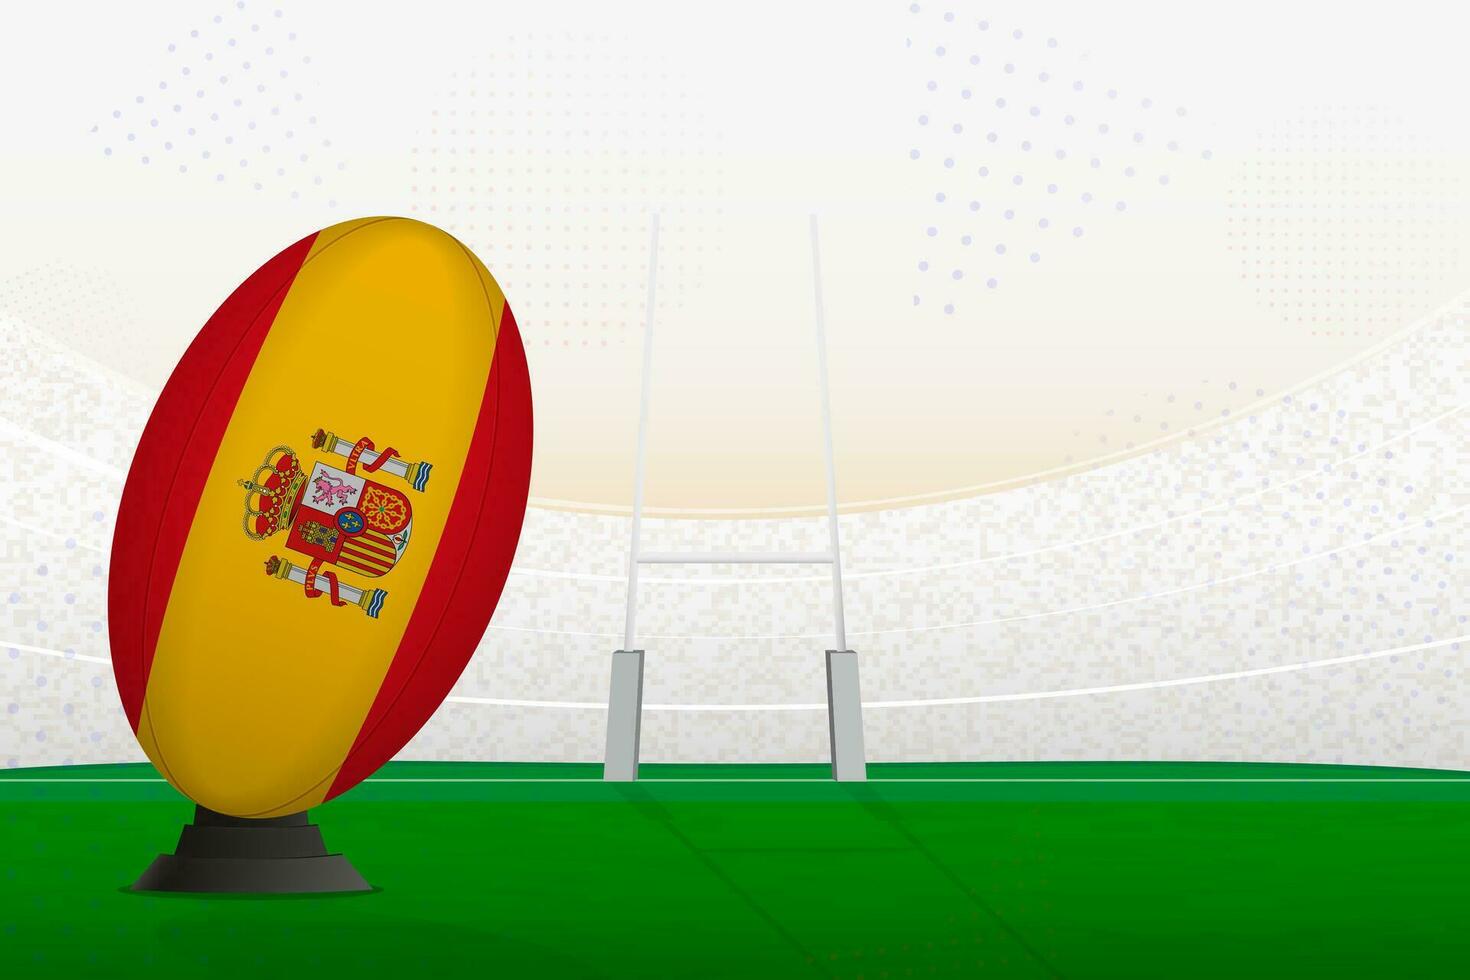 Spain national team rugby ball on rugby stadium and goal posts, preparing for a penalty or free kick. vector